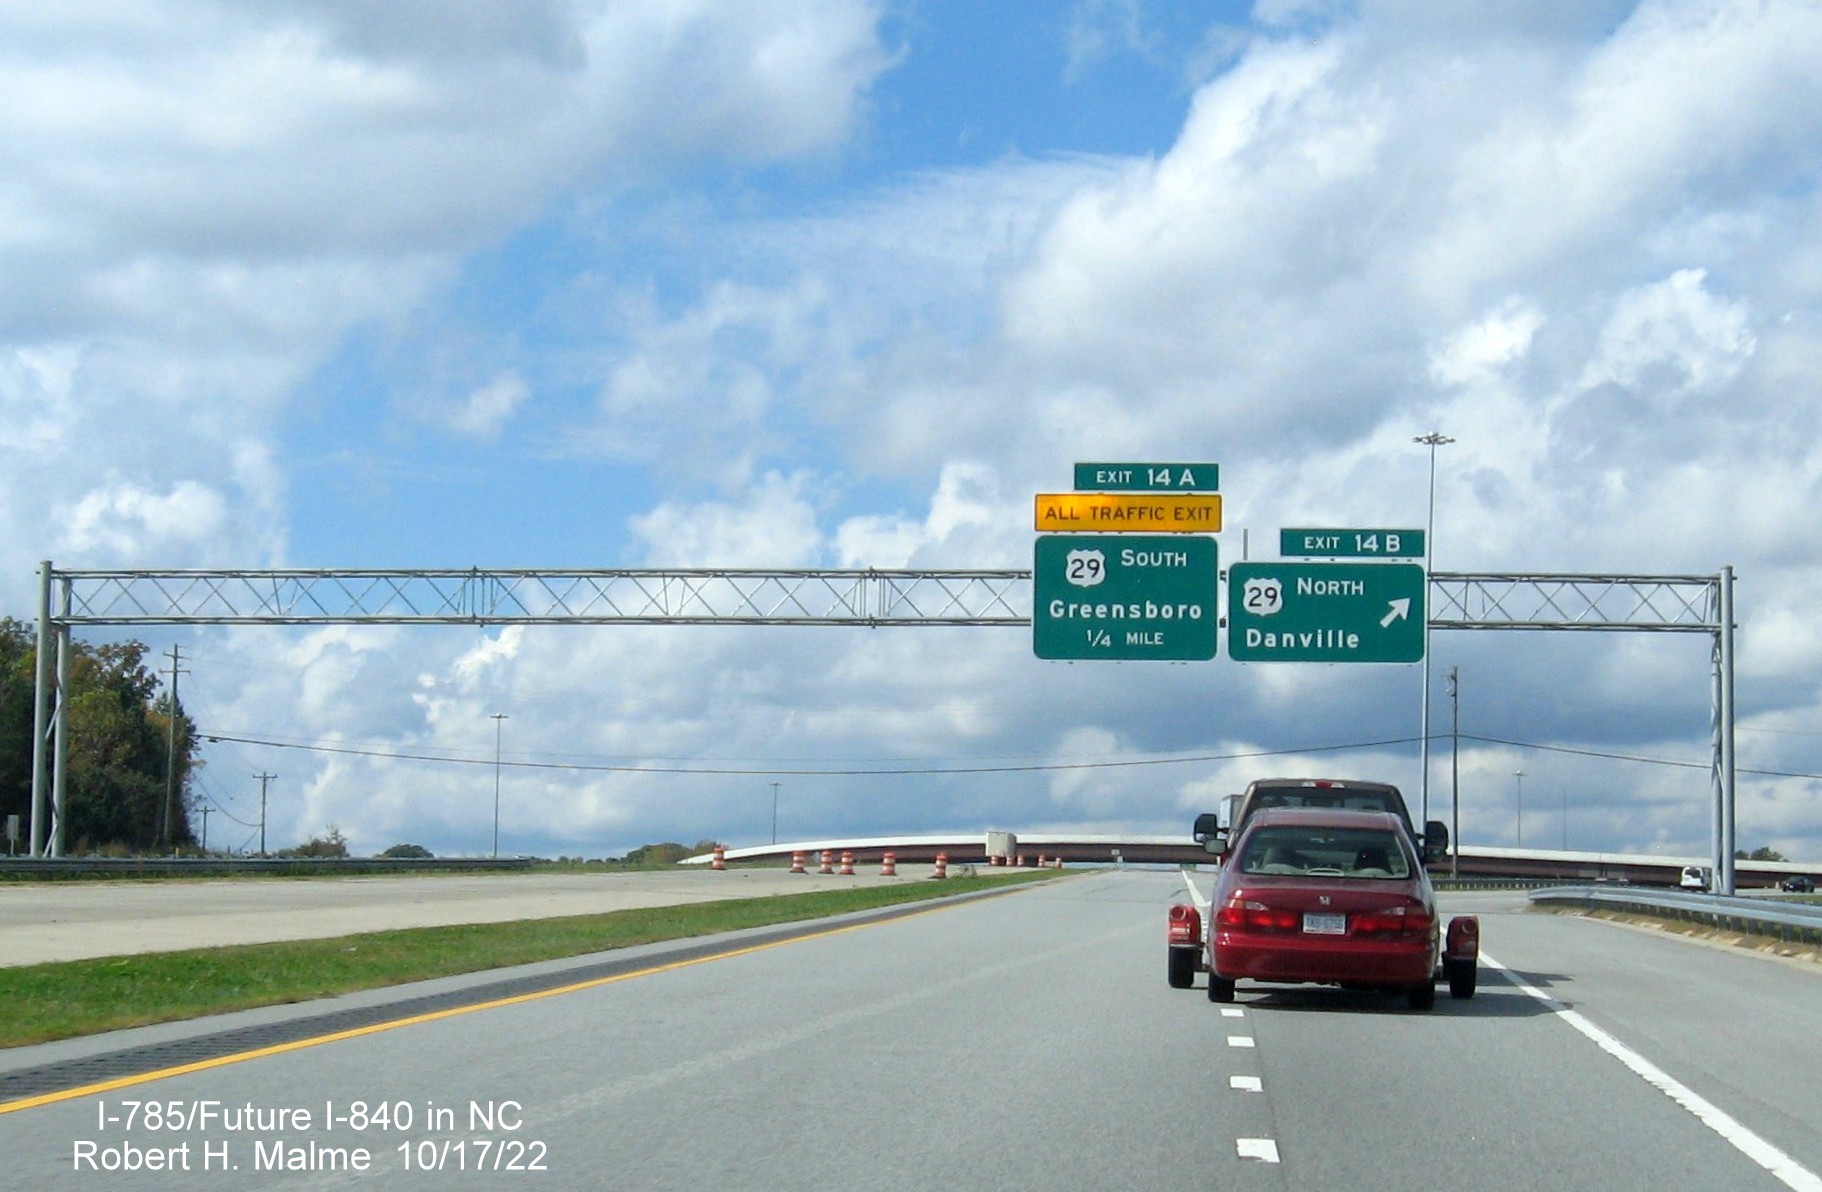 Image of overhead signage for US 29 exits on C/D ramp at current end of Eastern Section of Greensboro 
                  Urban Loop, October 2022